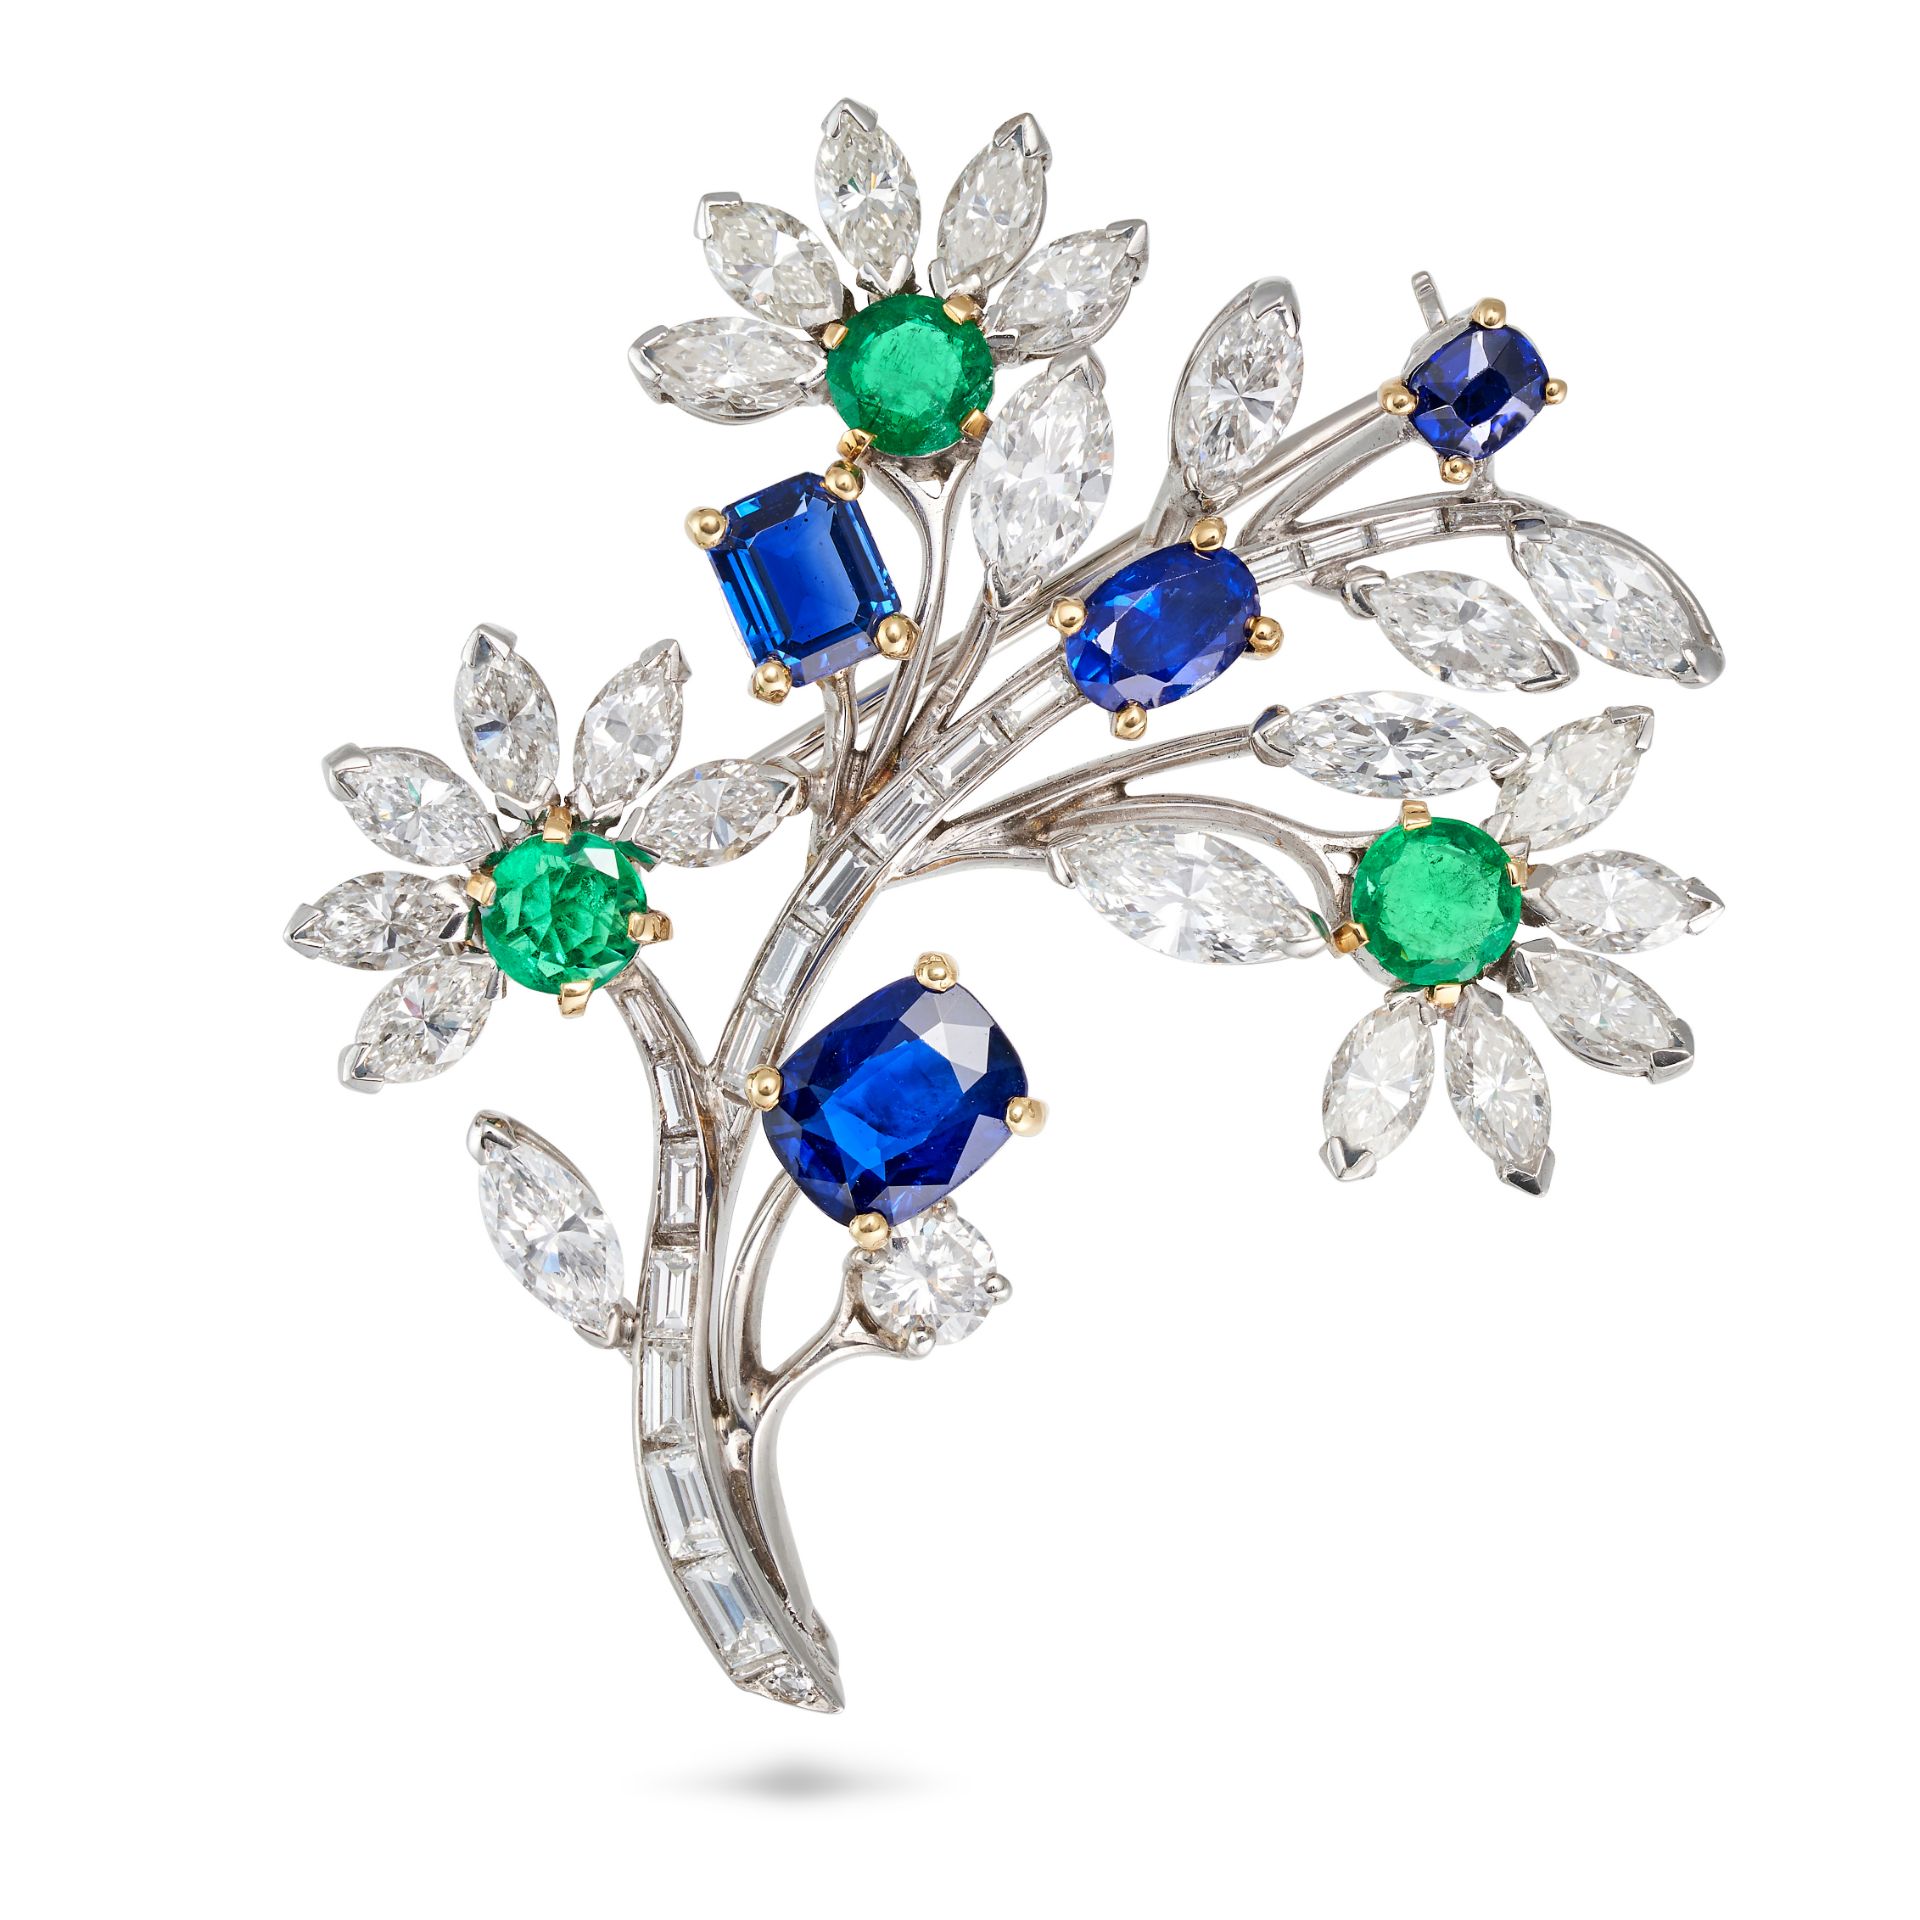 VAN CLEEF & ARPELS, AN UNHEATED SAPPHIRE, EMERALD AND DIAMOND FLORAL SPRAY BROOCH, 1950S in plati...